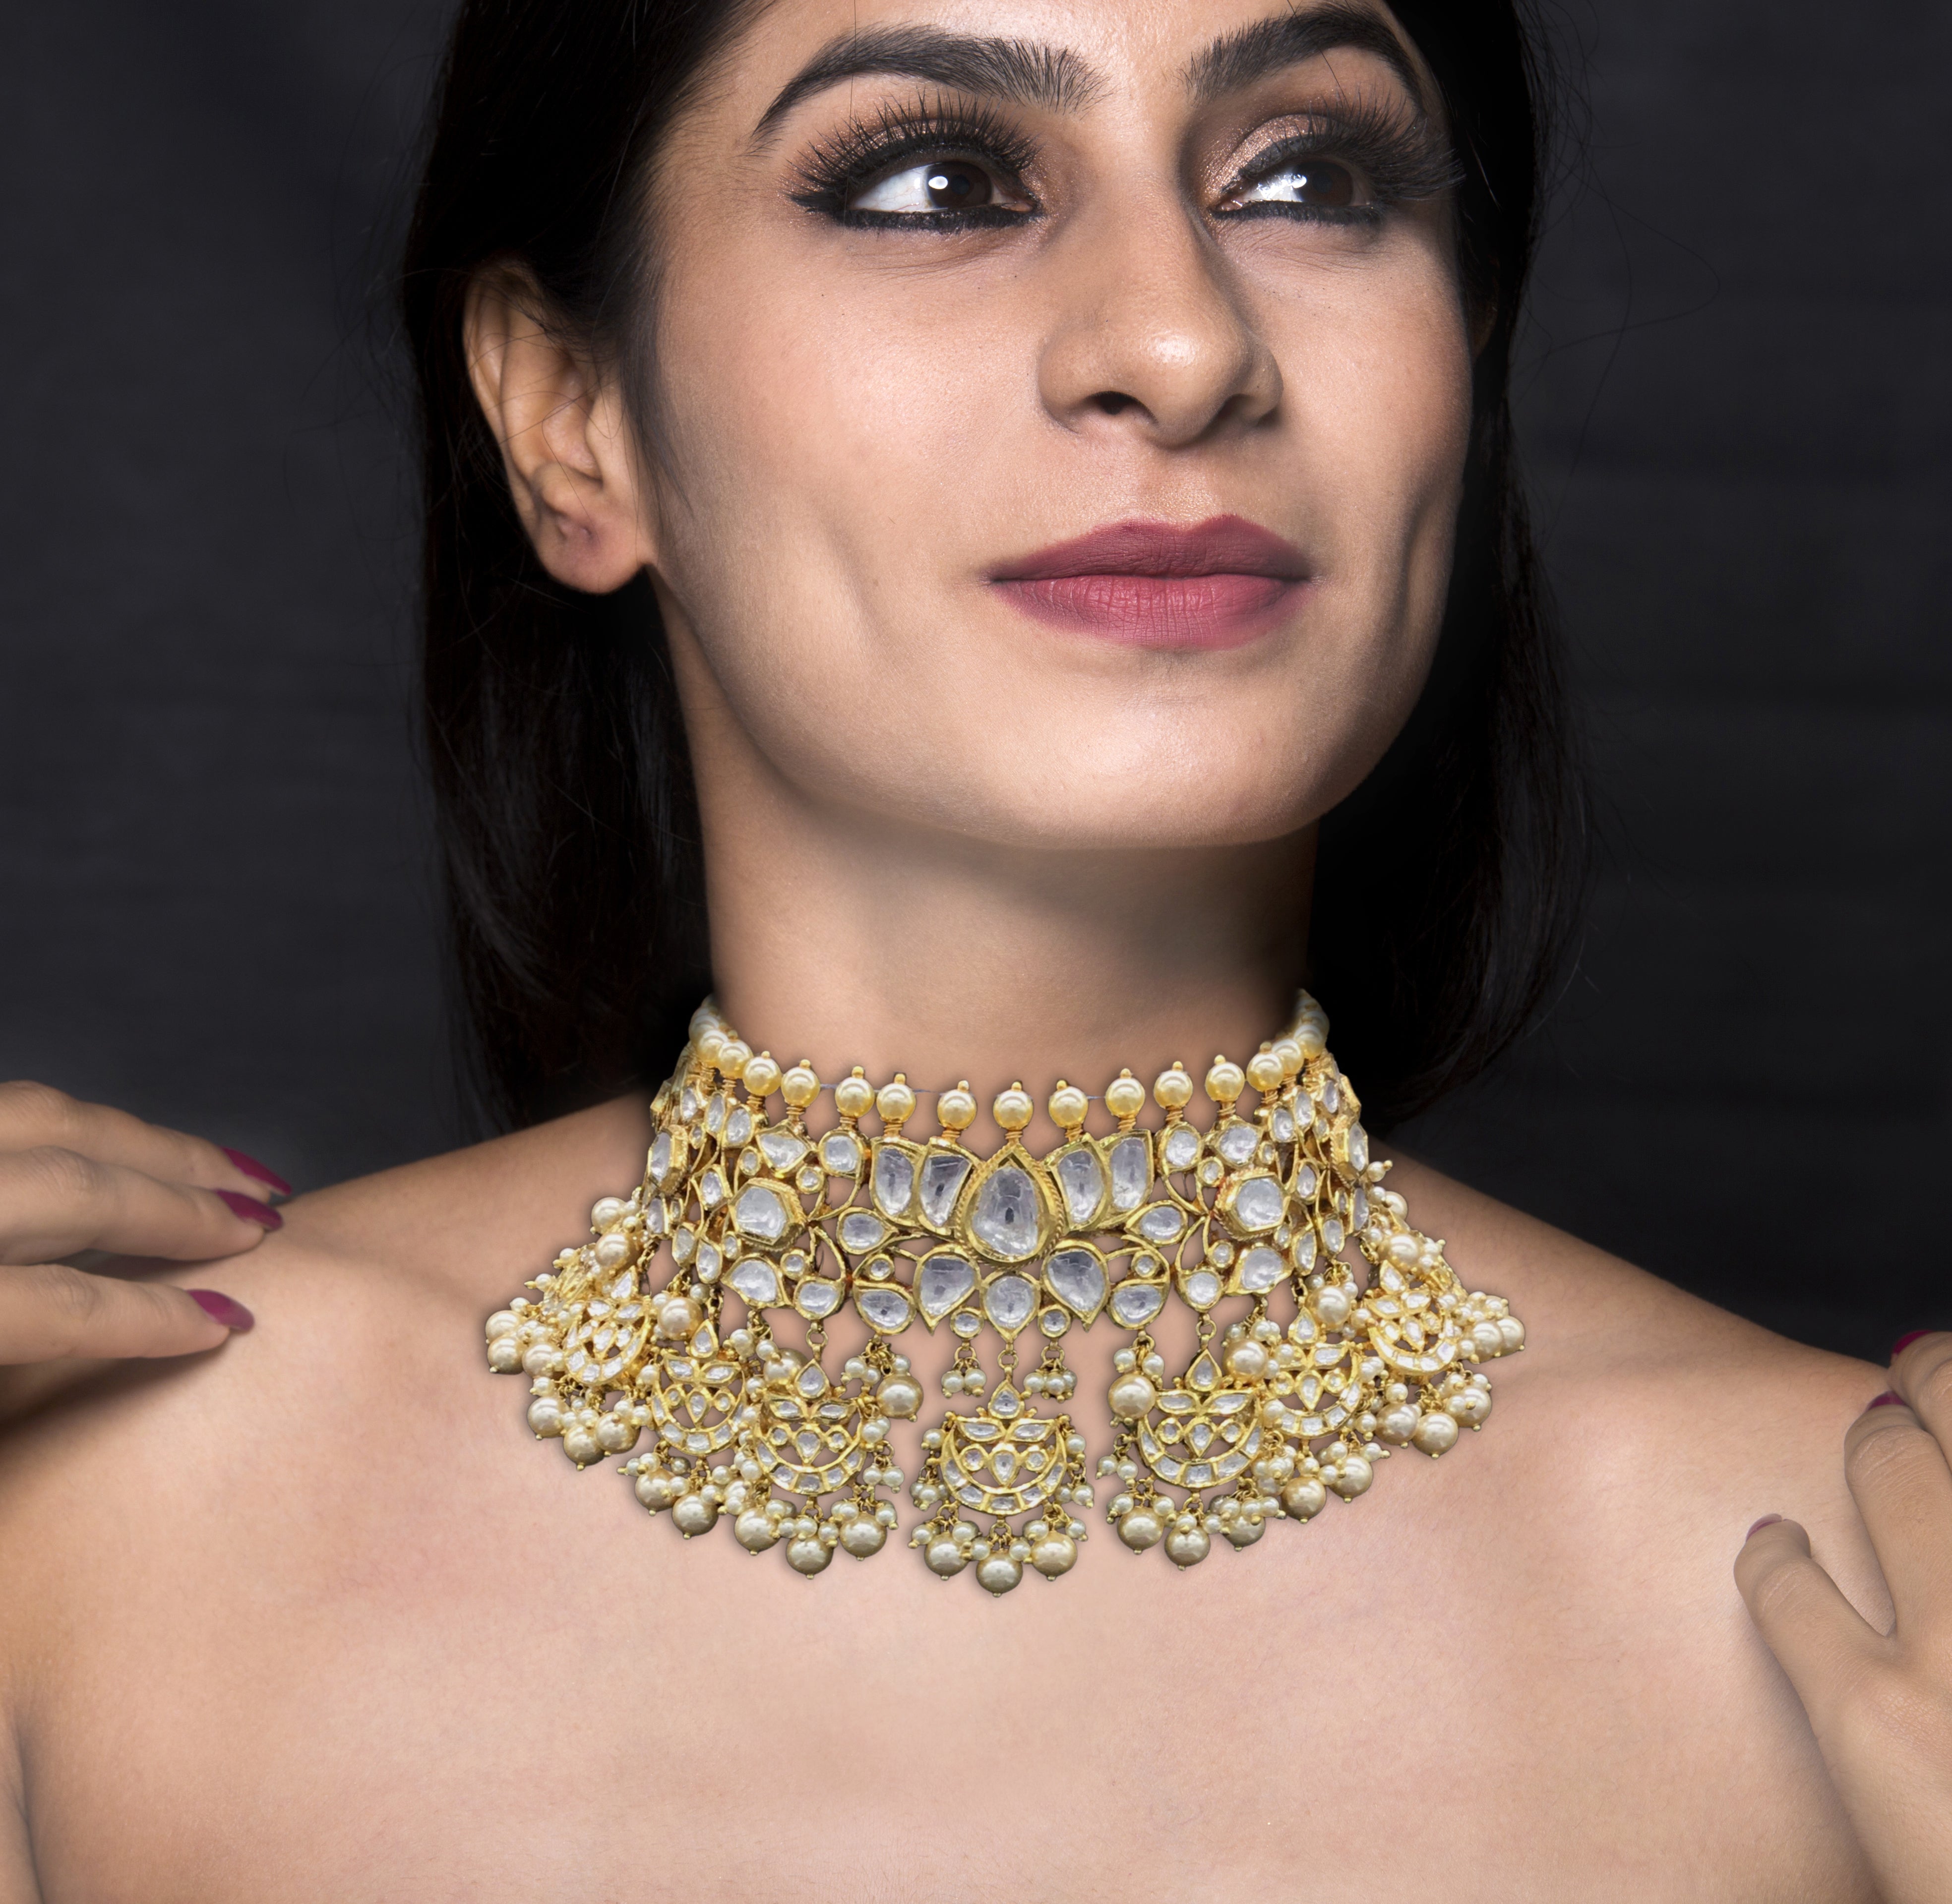 18k Gold and Diamond Polki Lotus Choker Necklace Set with multiple chand hangings - G. K. Ratnam